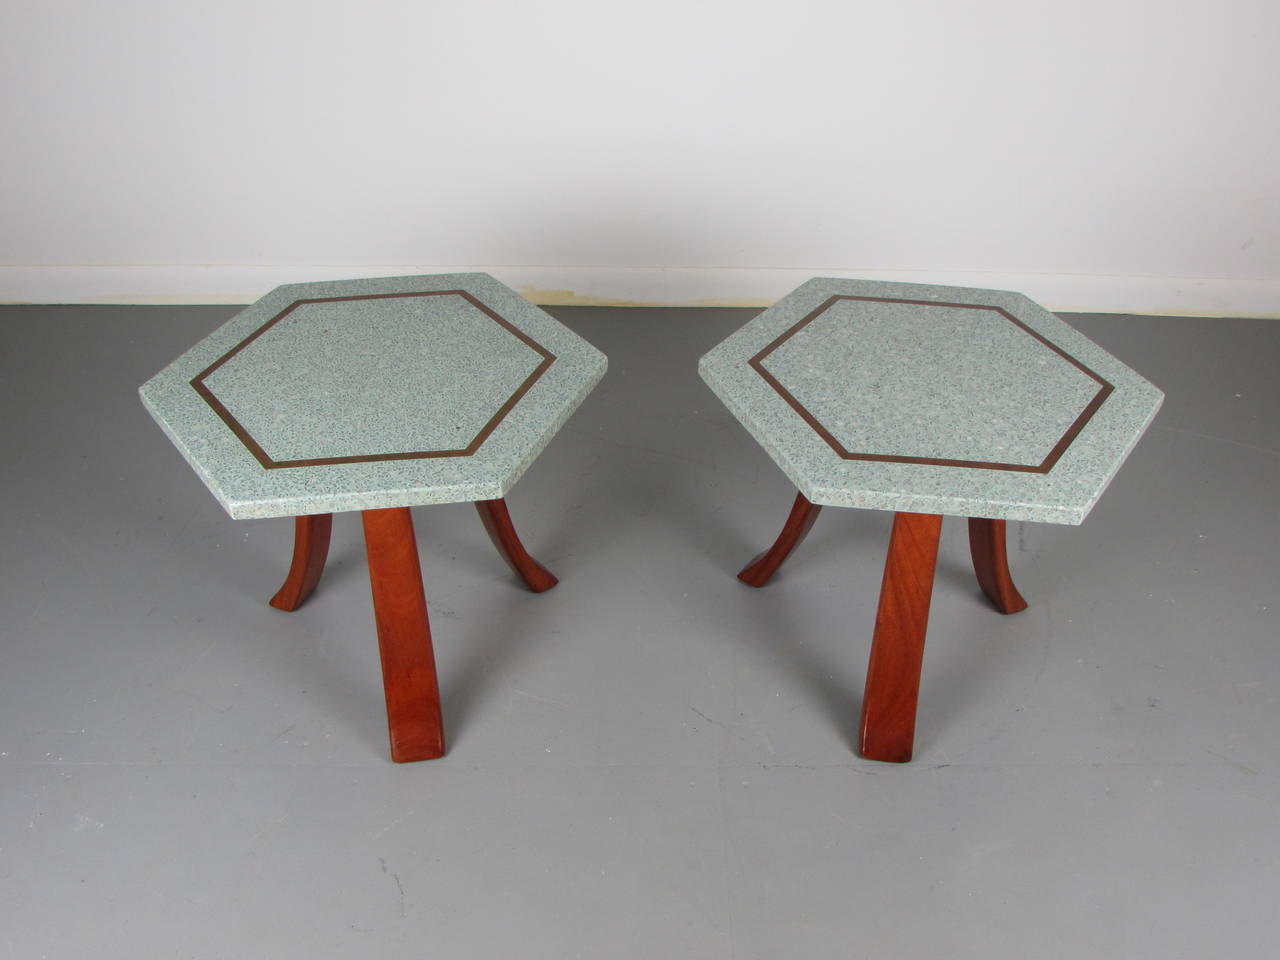 Pair of sculptural end or side tables with terrazzo and brass inlaid tops by Harvey Probber, 1960s. Absolutely remarkable design that fits into any room. The unusual sea foam hued terrazzo tops are flawless and stunning. Walnut bases are very sturdy